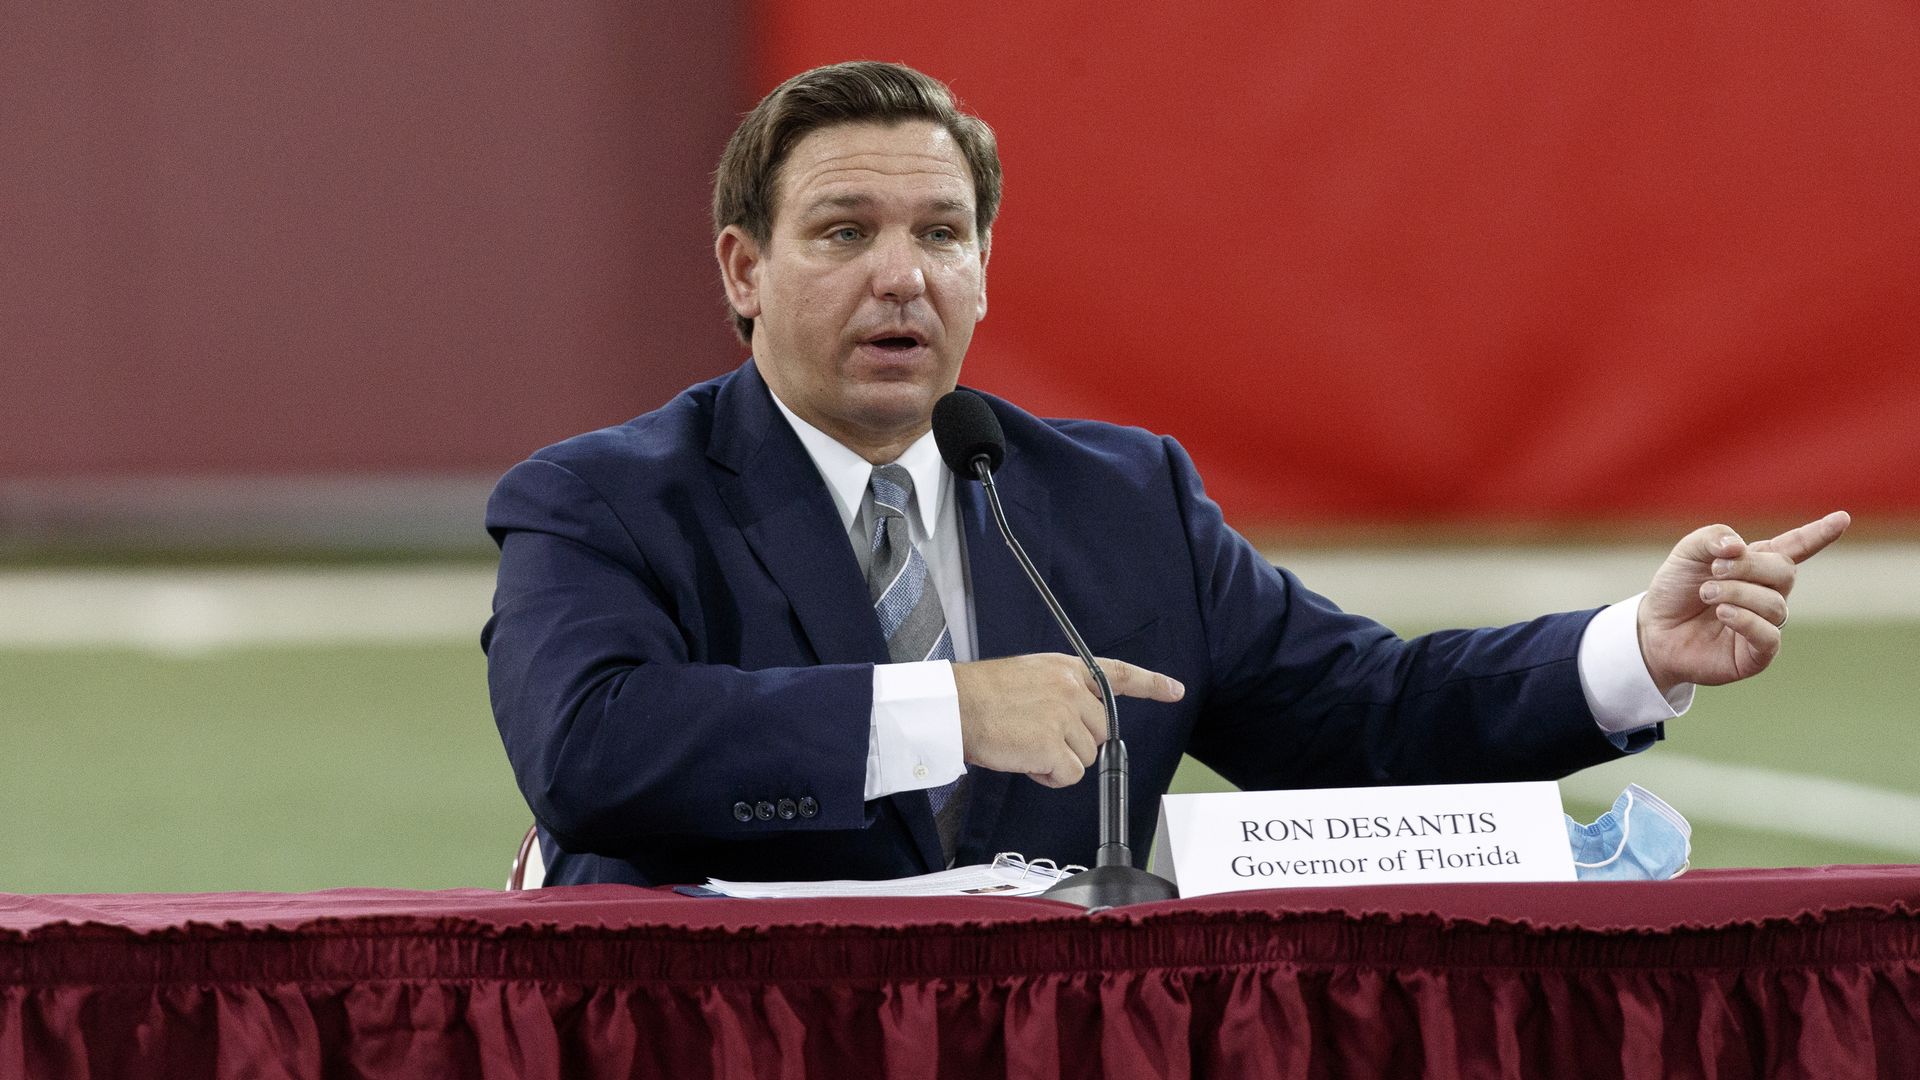 Ron DeSantis sits in front of a microphone, wearing a suit